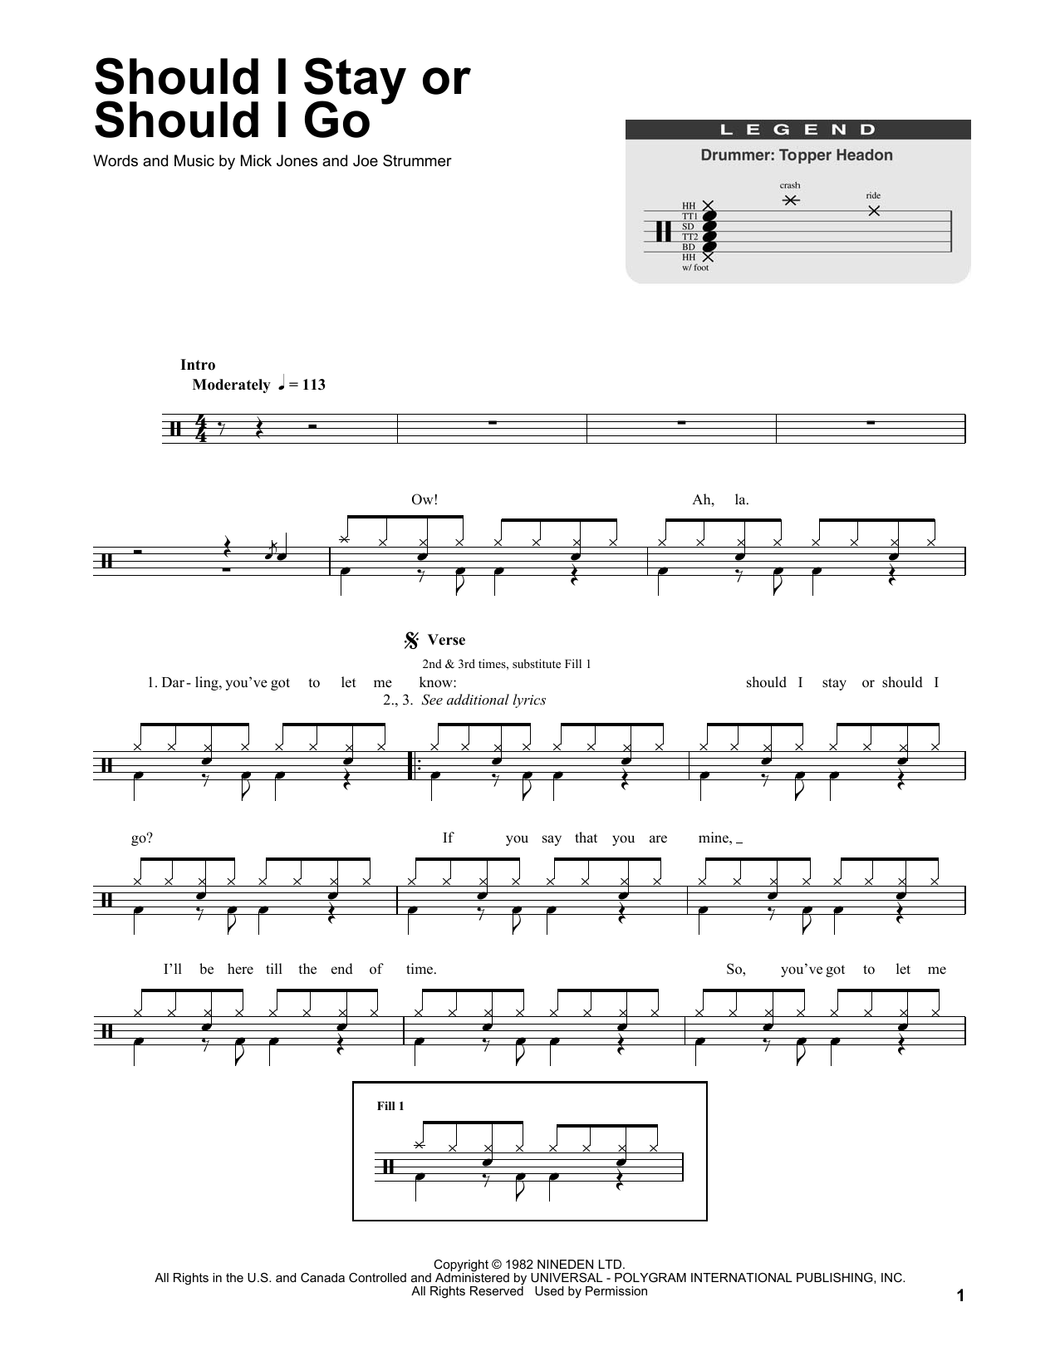 Should I Stay or Should I Go - The Clash - Full Drum Transcription / Drum Sheet Music - SheetMusicDirect DT175153